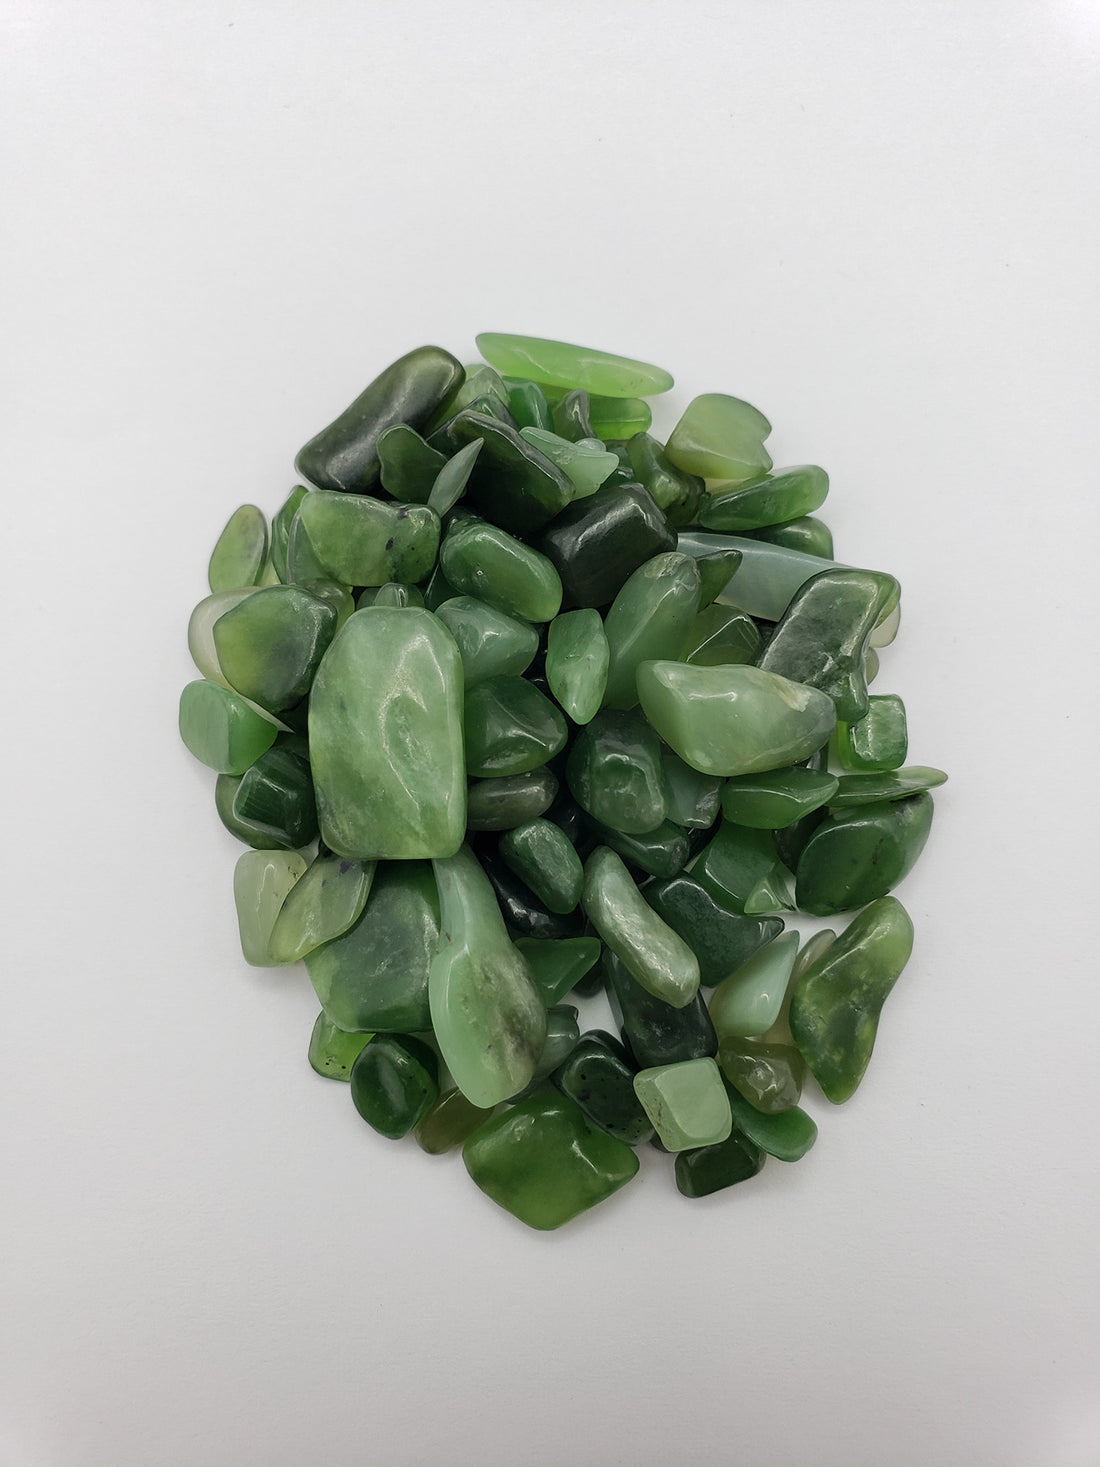 One ounce of nephrite jade chips on white background